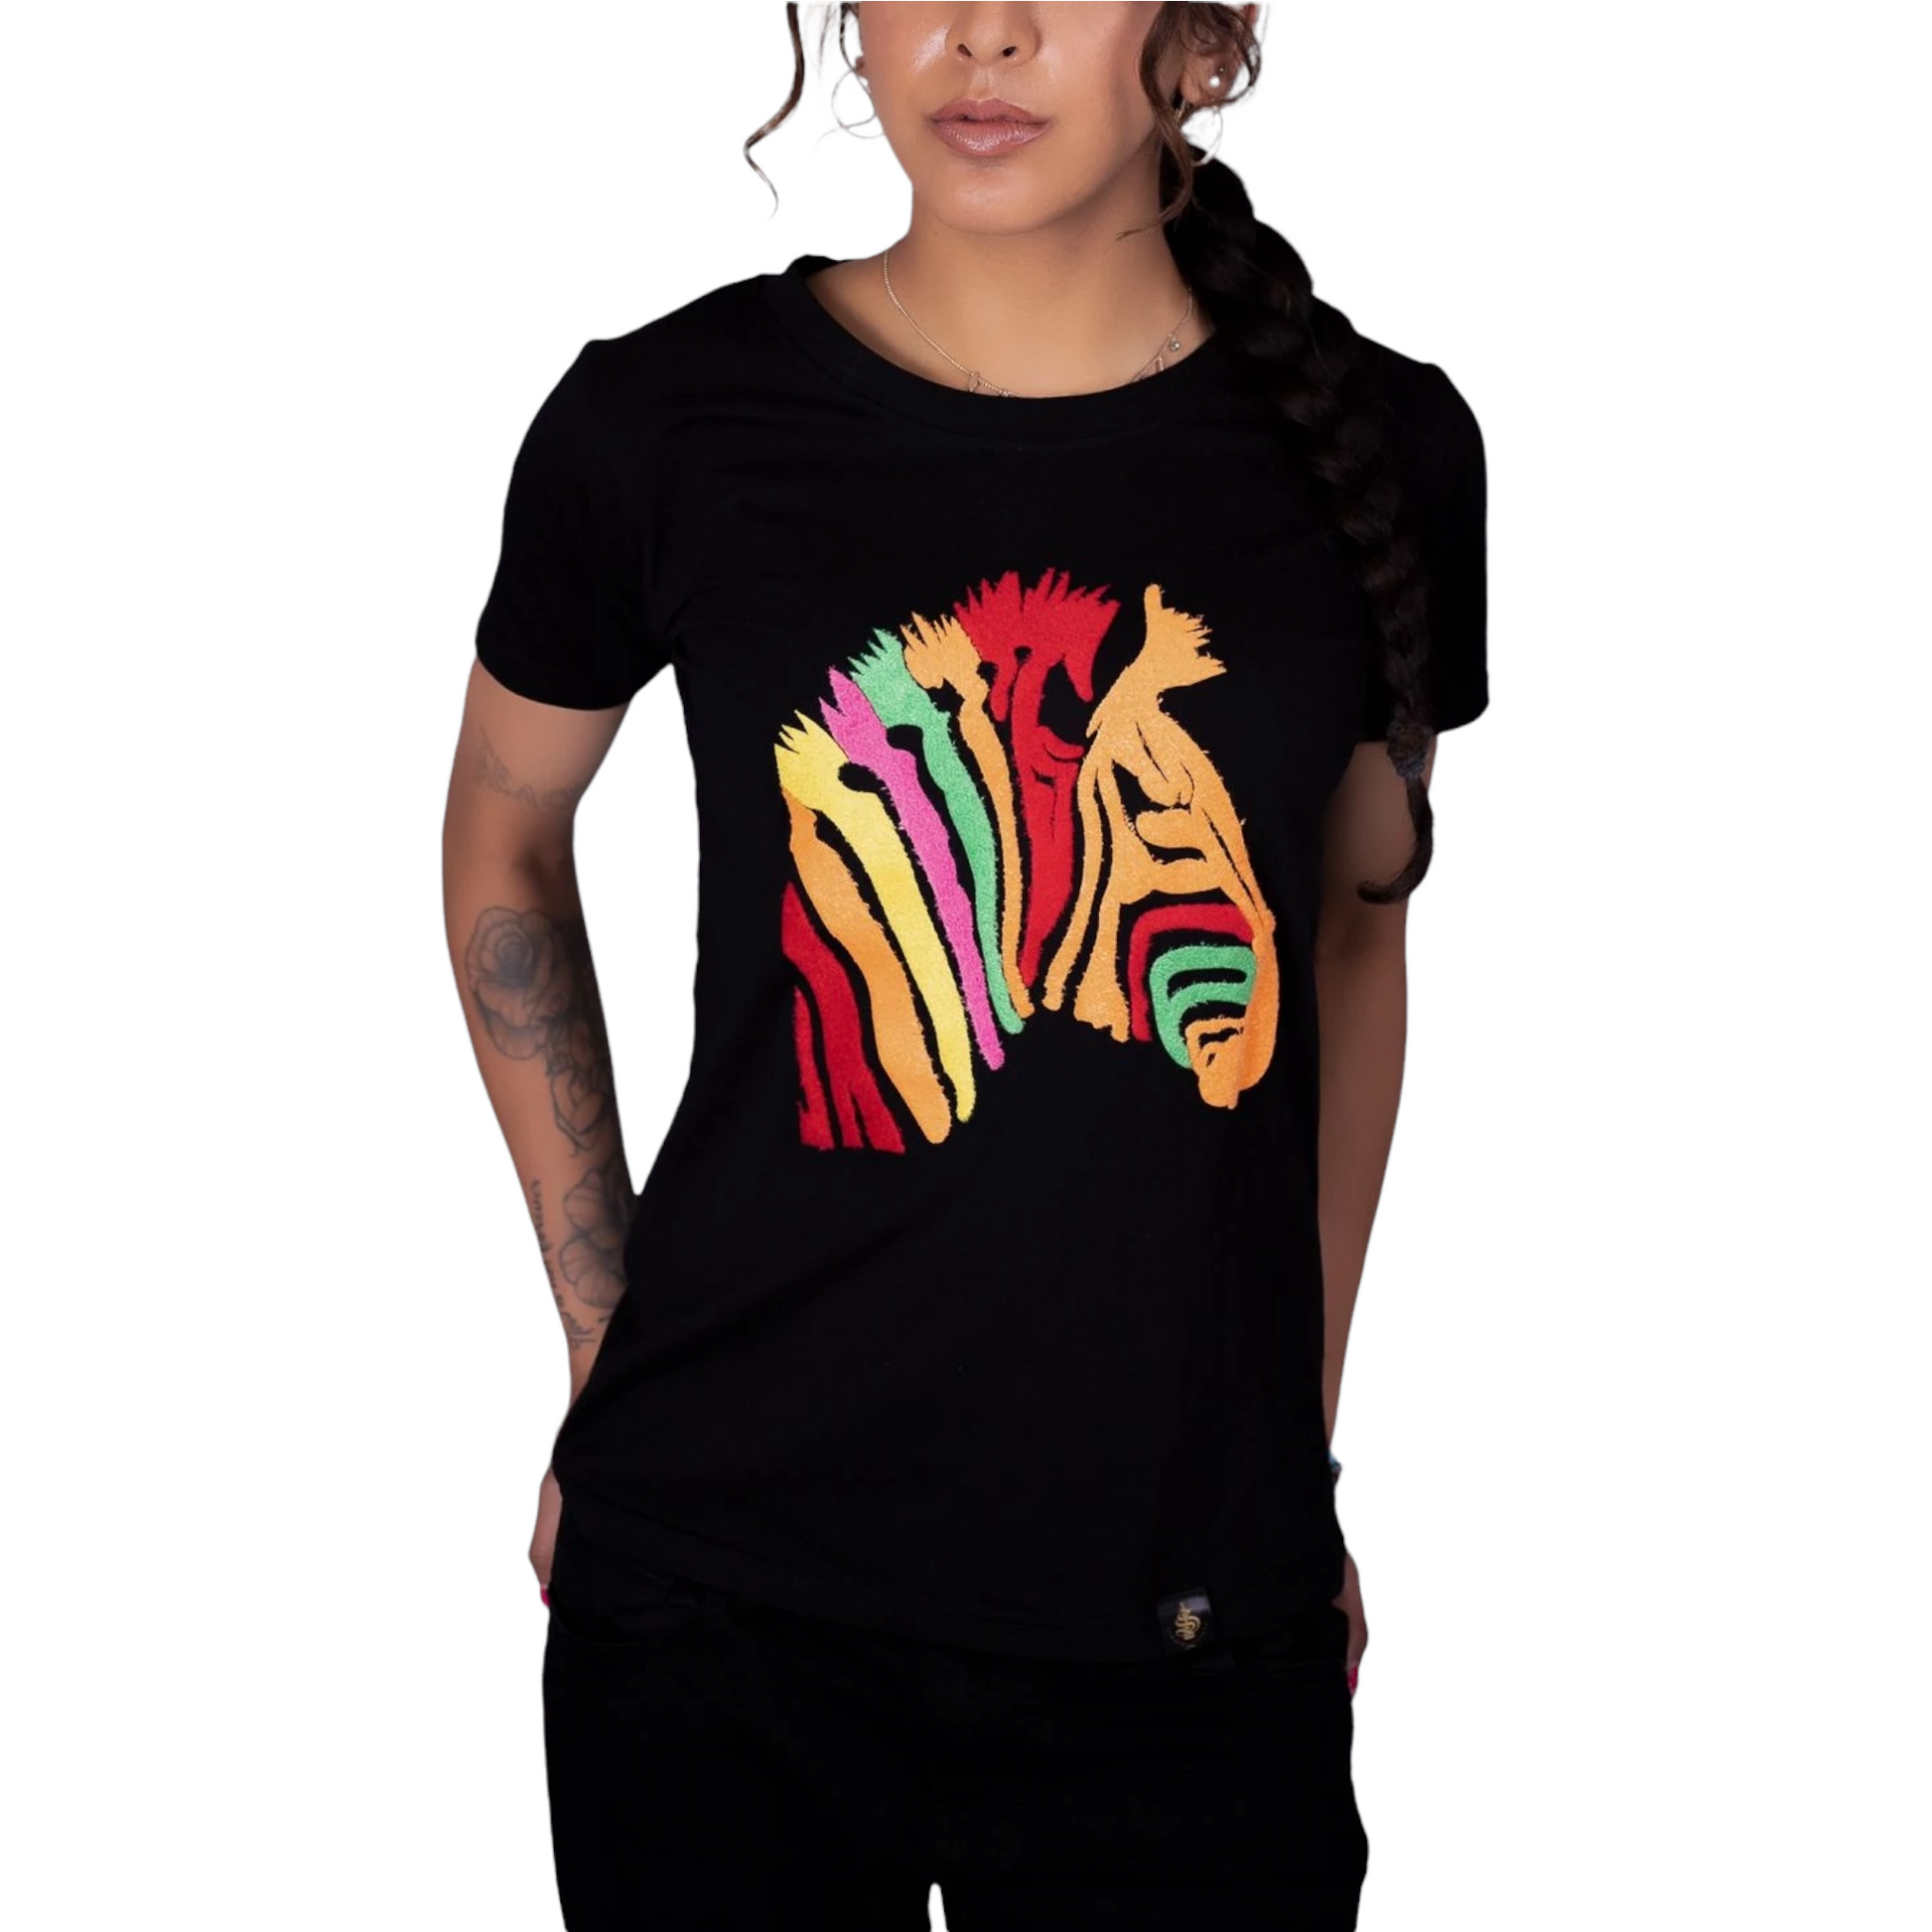 Exclusive Zebra Design T-shirt (Men and Women) Restocked!! Limited stock! - TheSinners2Saints